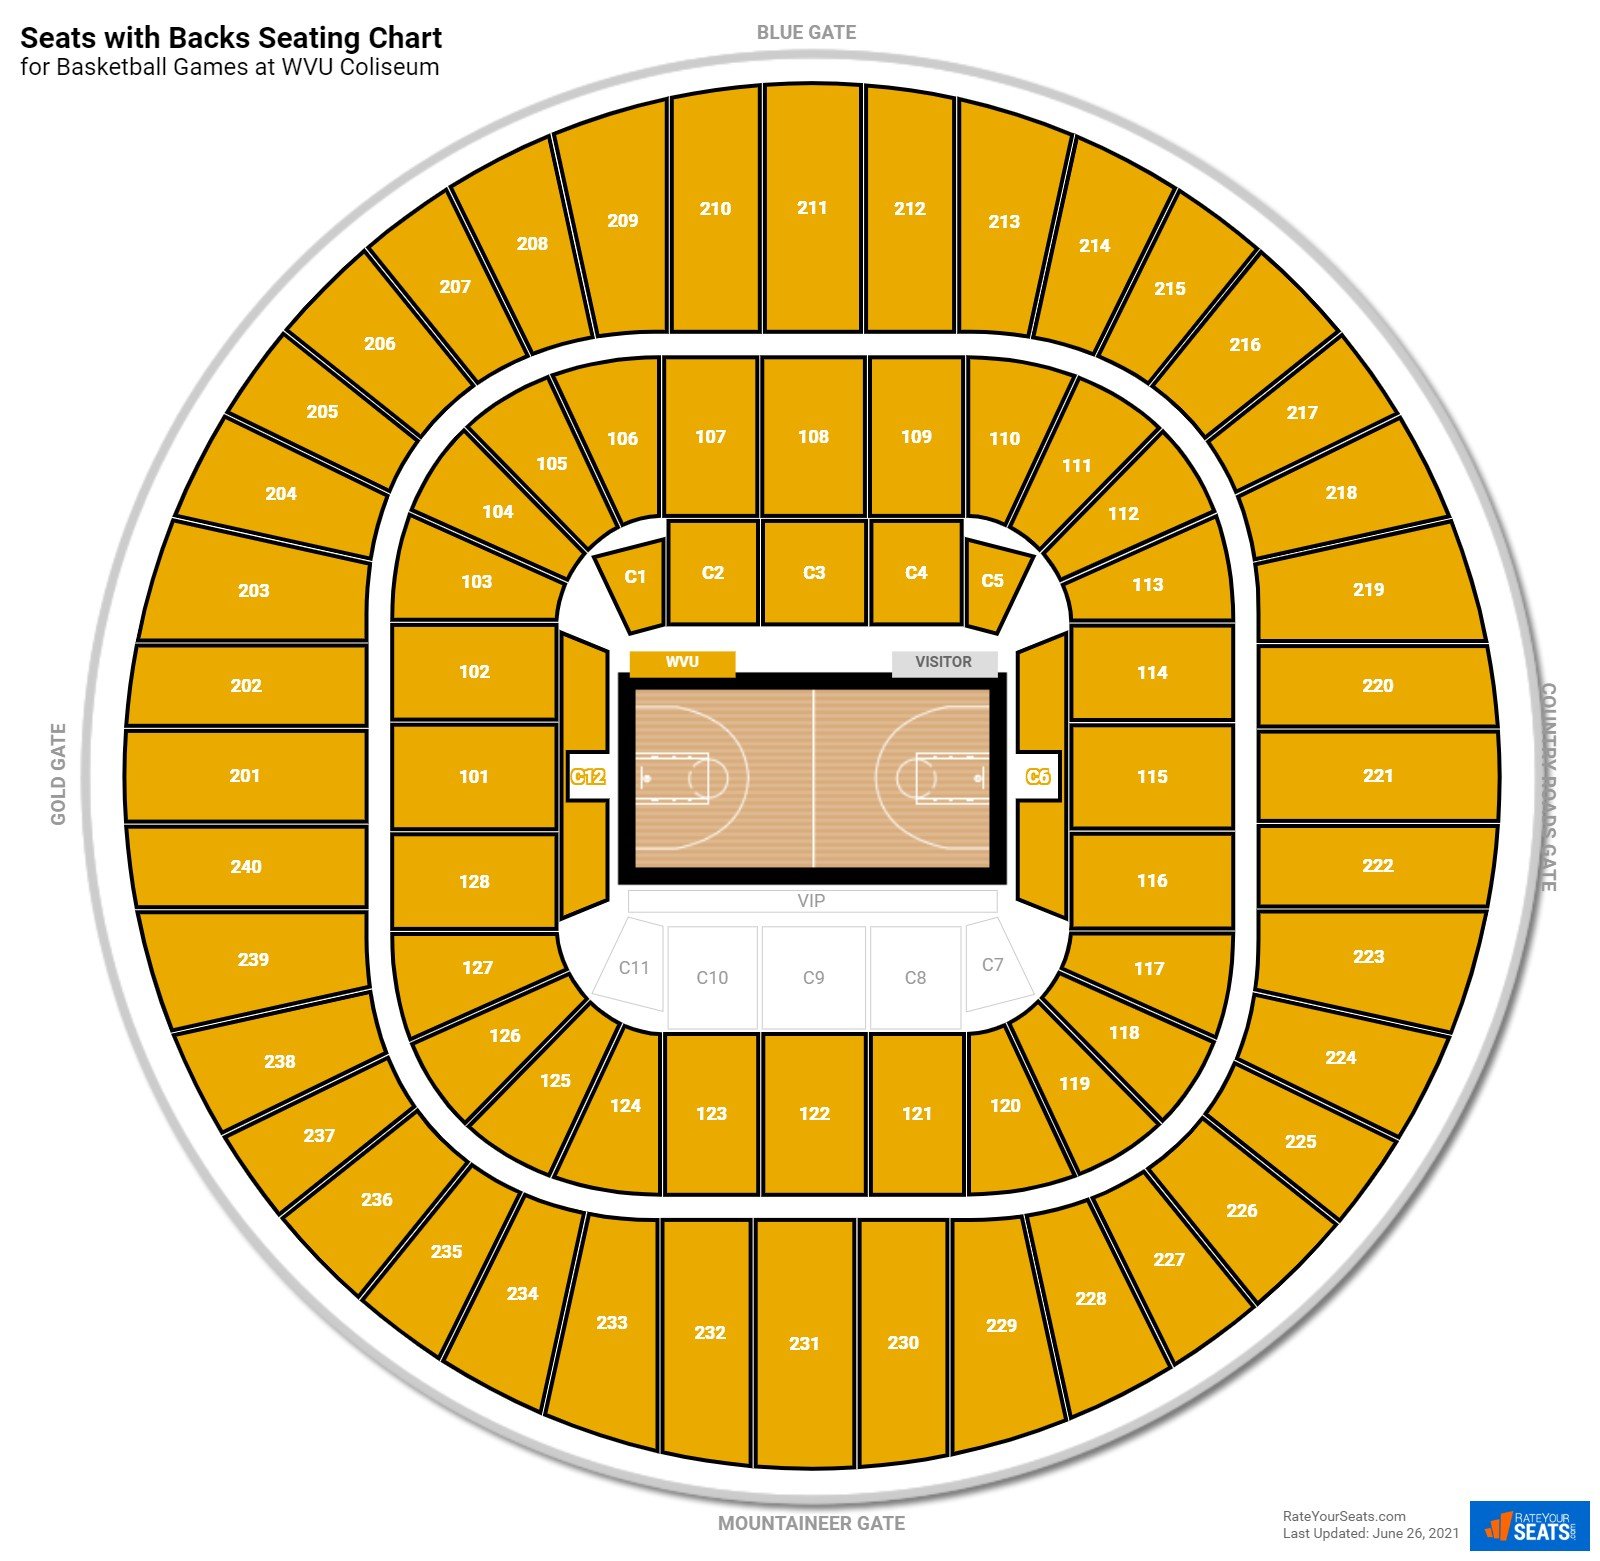 Basketball Seats with Backs Seating Chart at WVU Coliseum